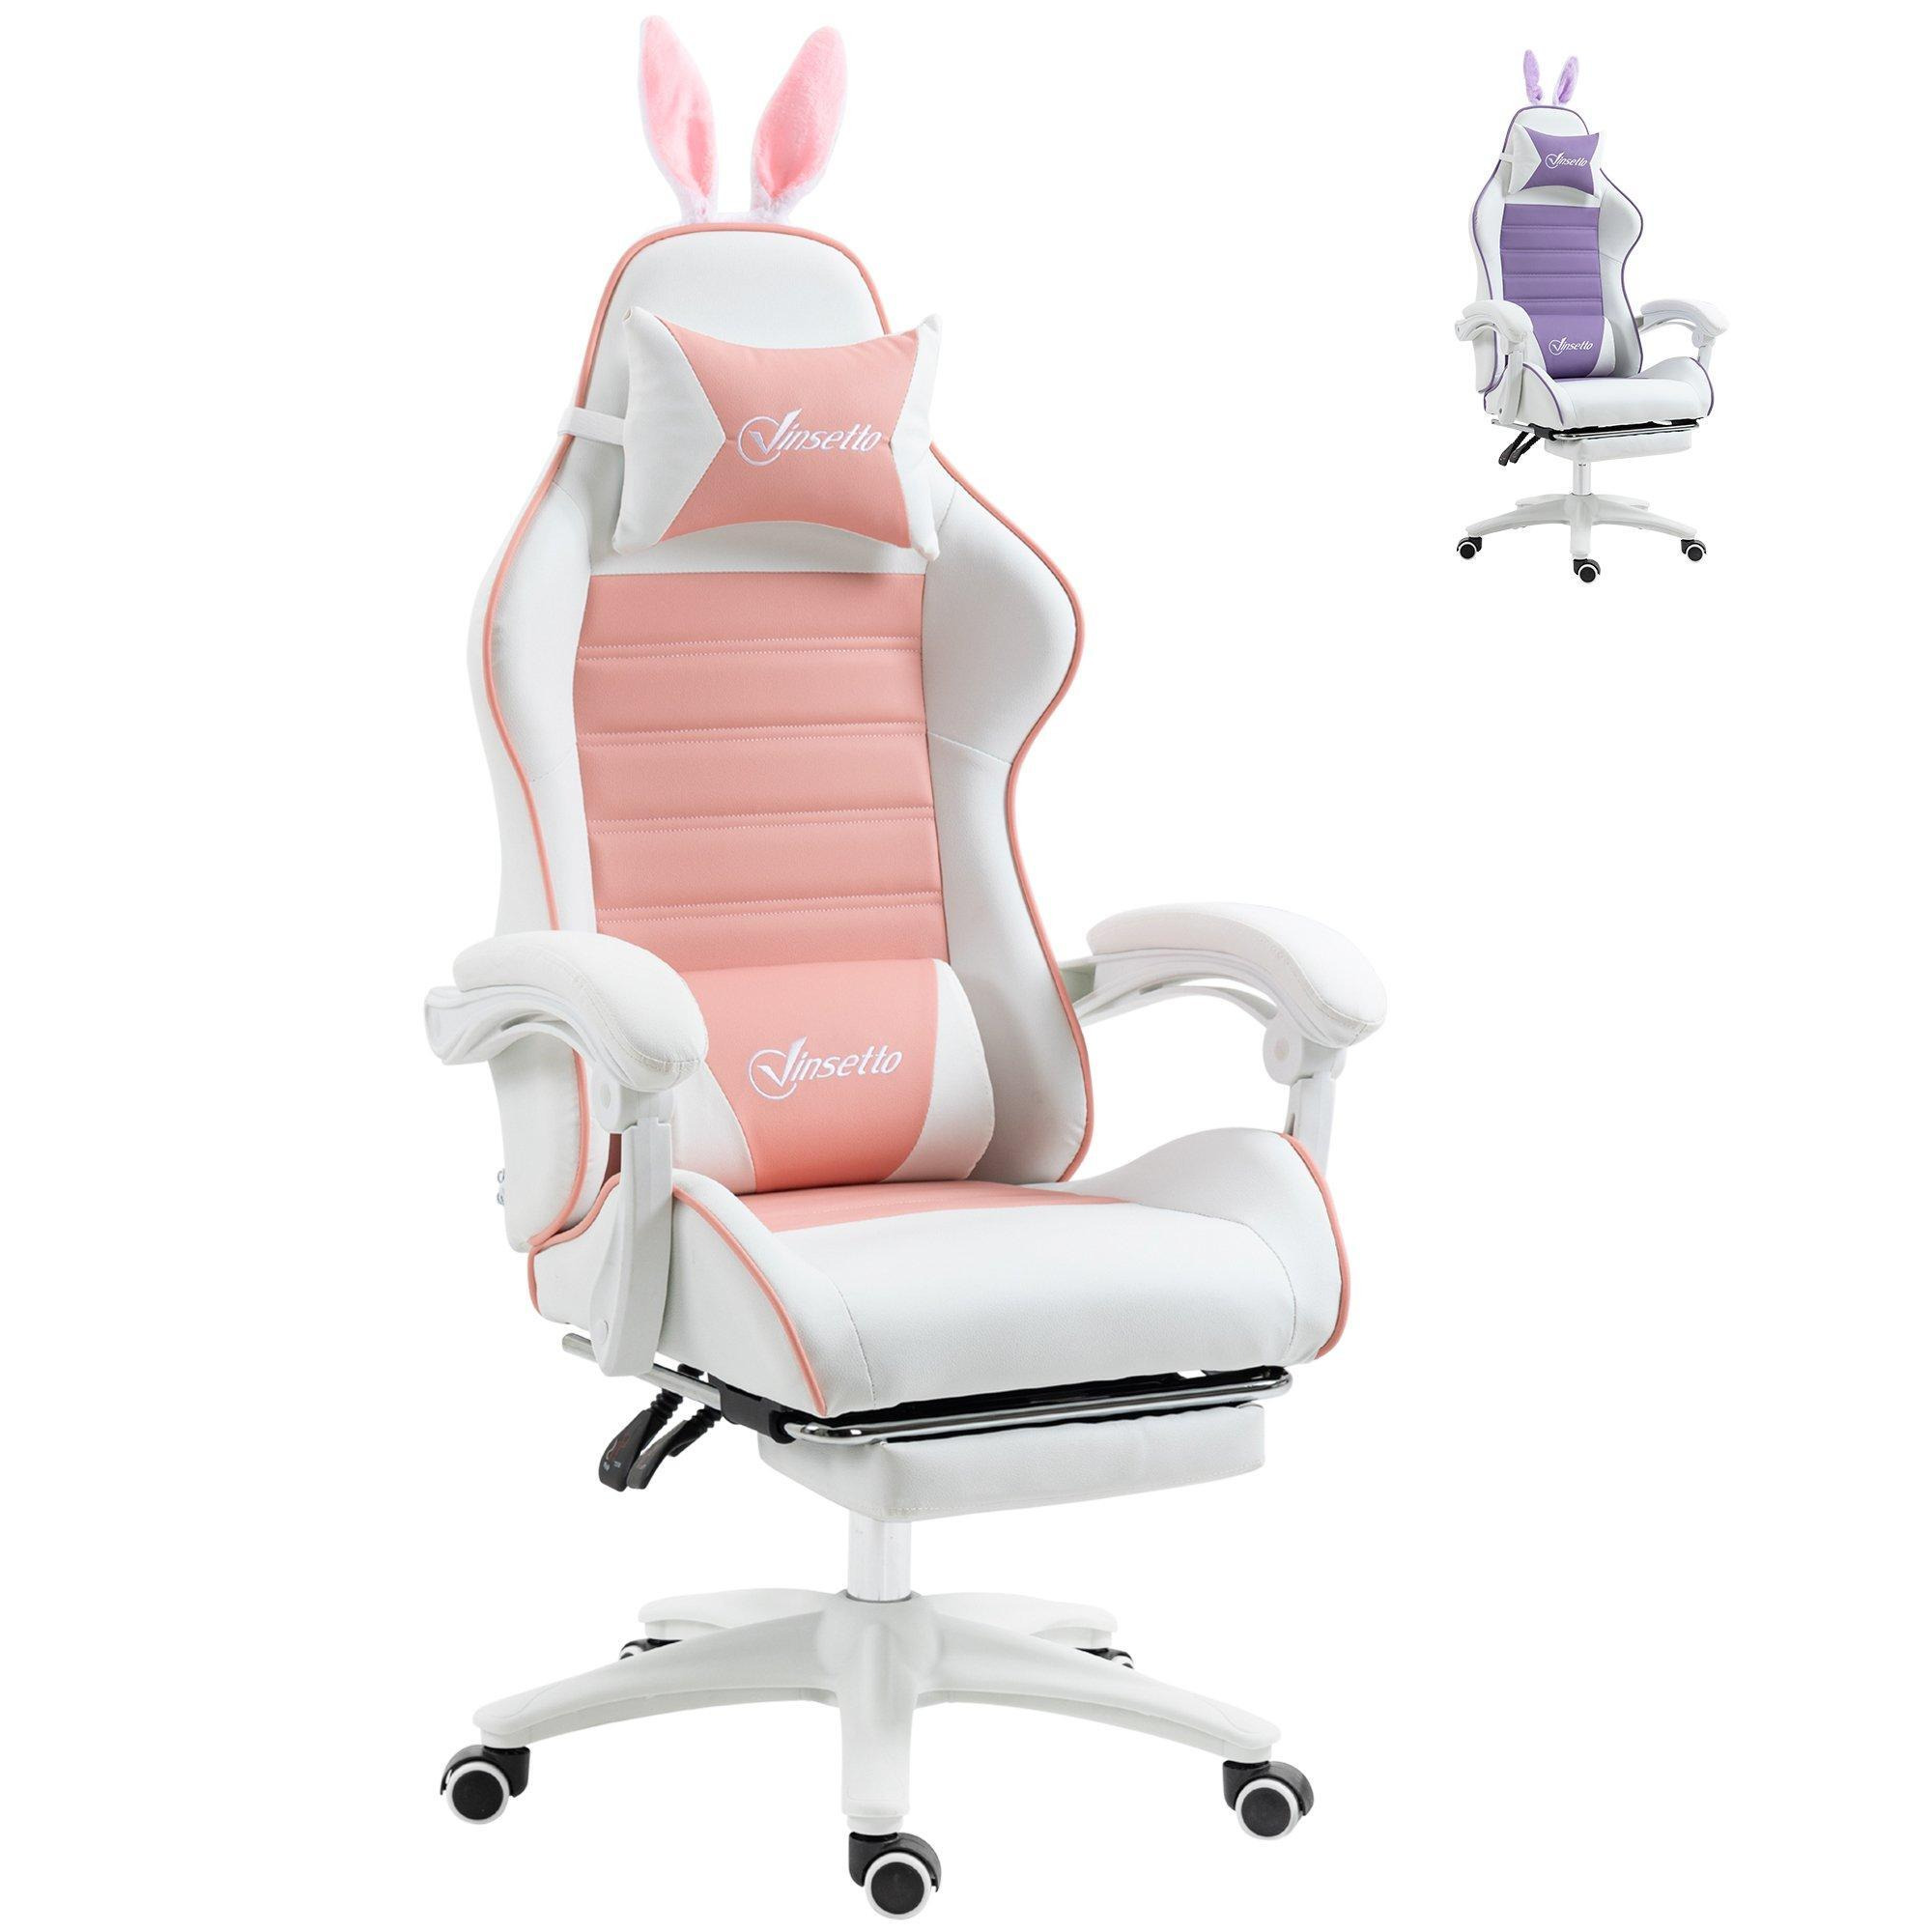 Racing Gaming Chair Reclining PU Leather Computer Chair with Headrest - image 1